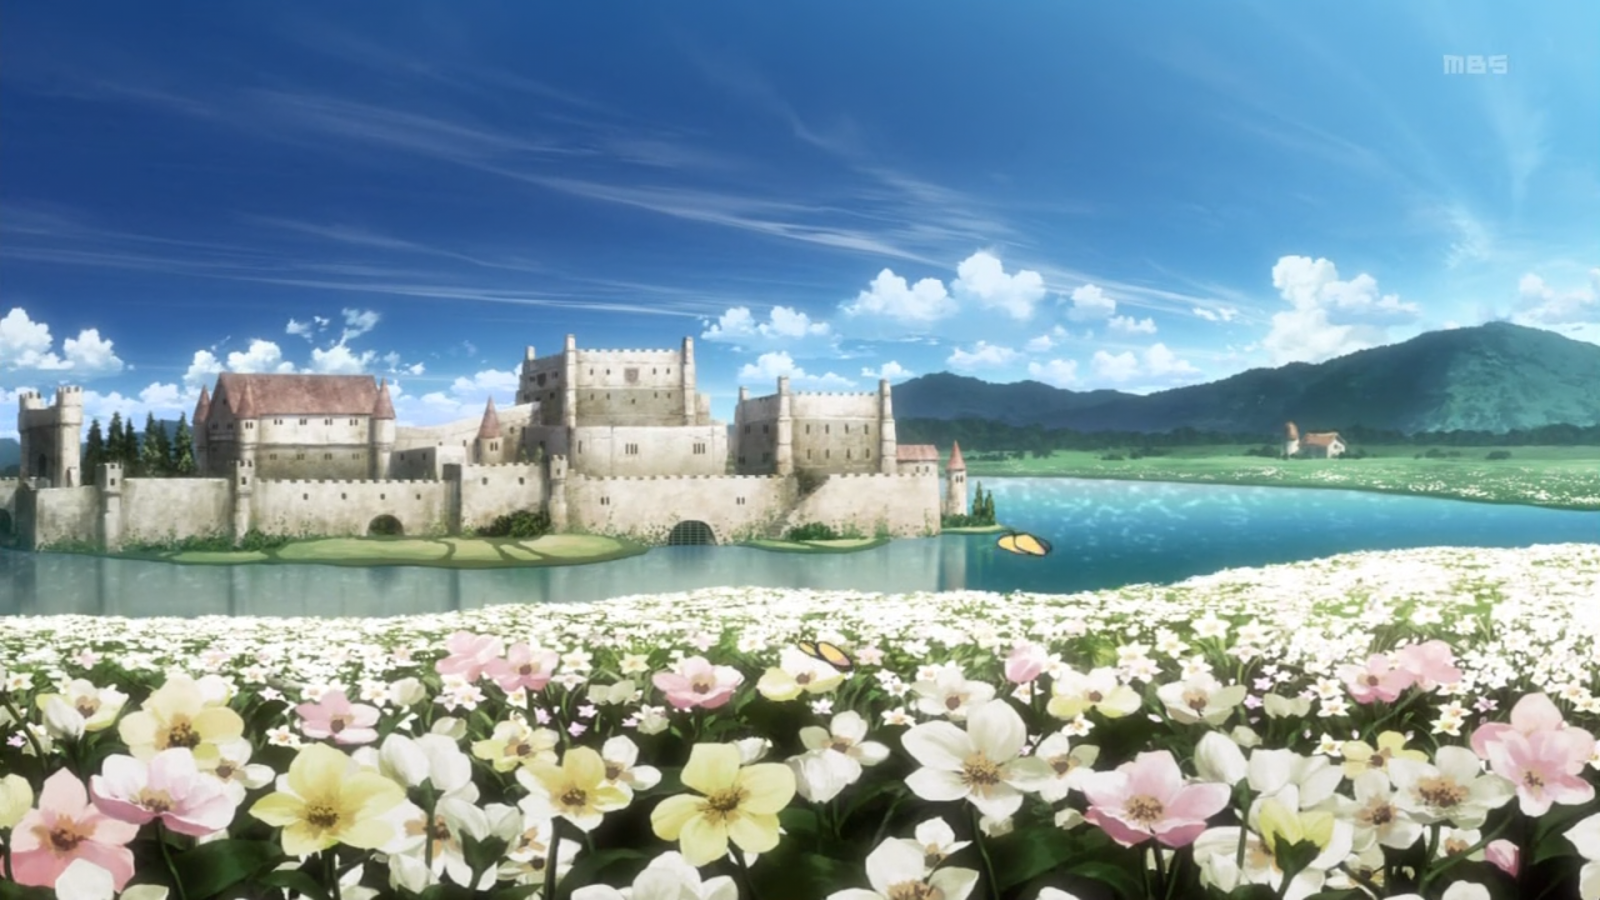 attack on titan scenery wallpapers Wallpapers